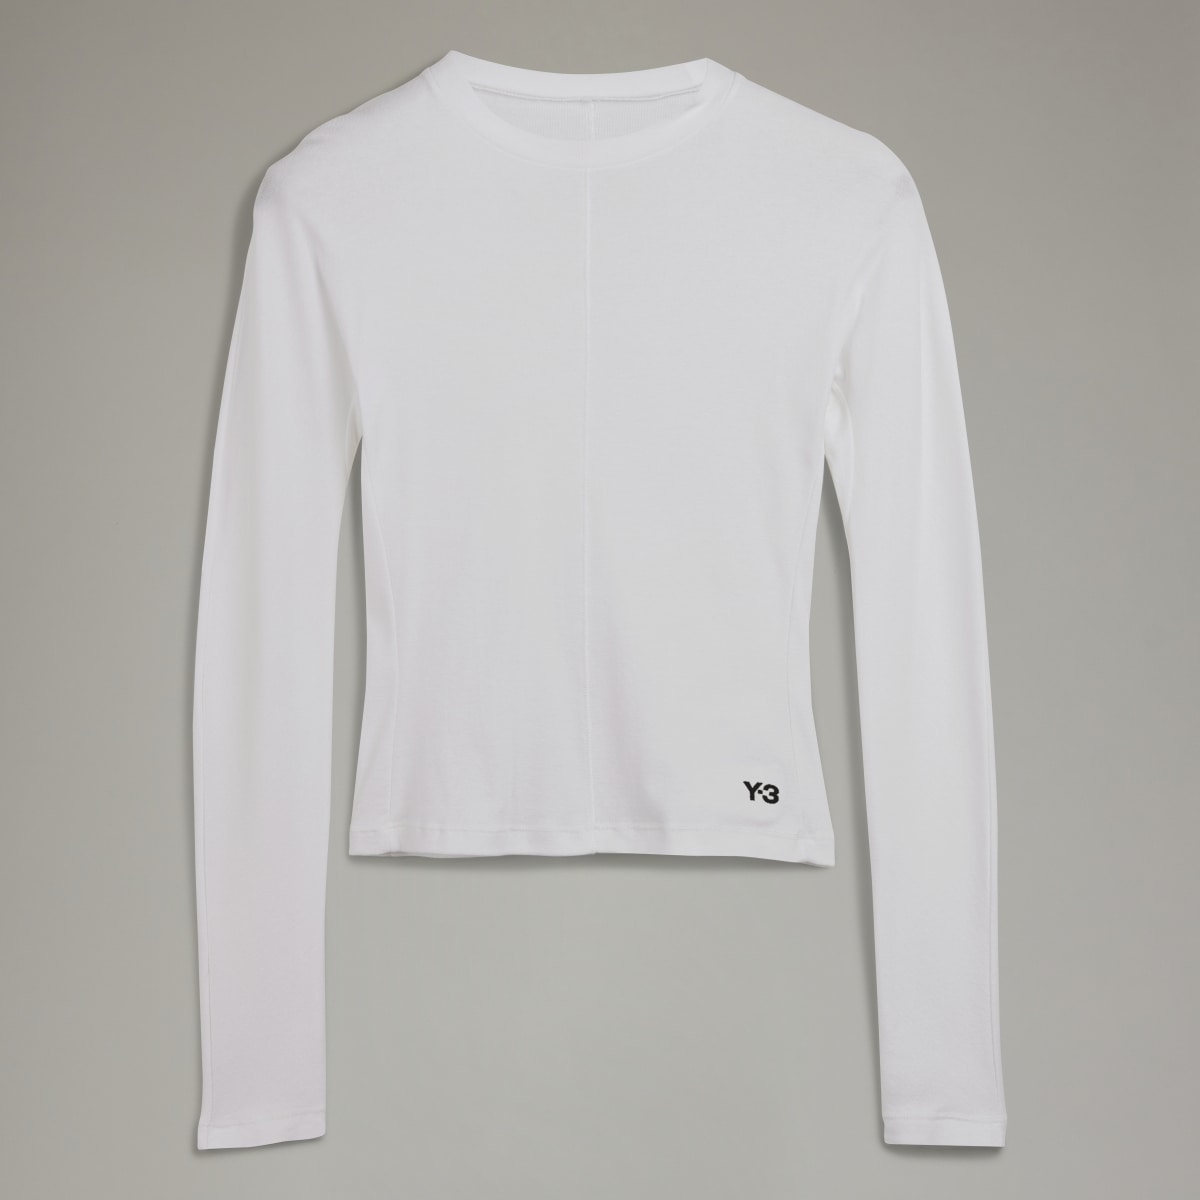 Adidas Y-3 Fitted Long-Sleeve Top. 5